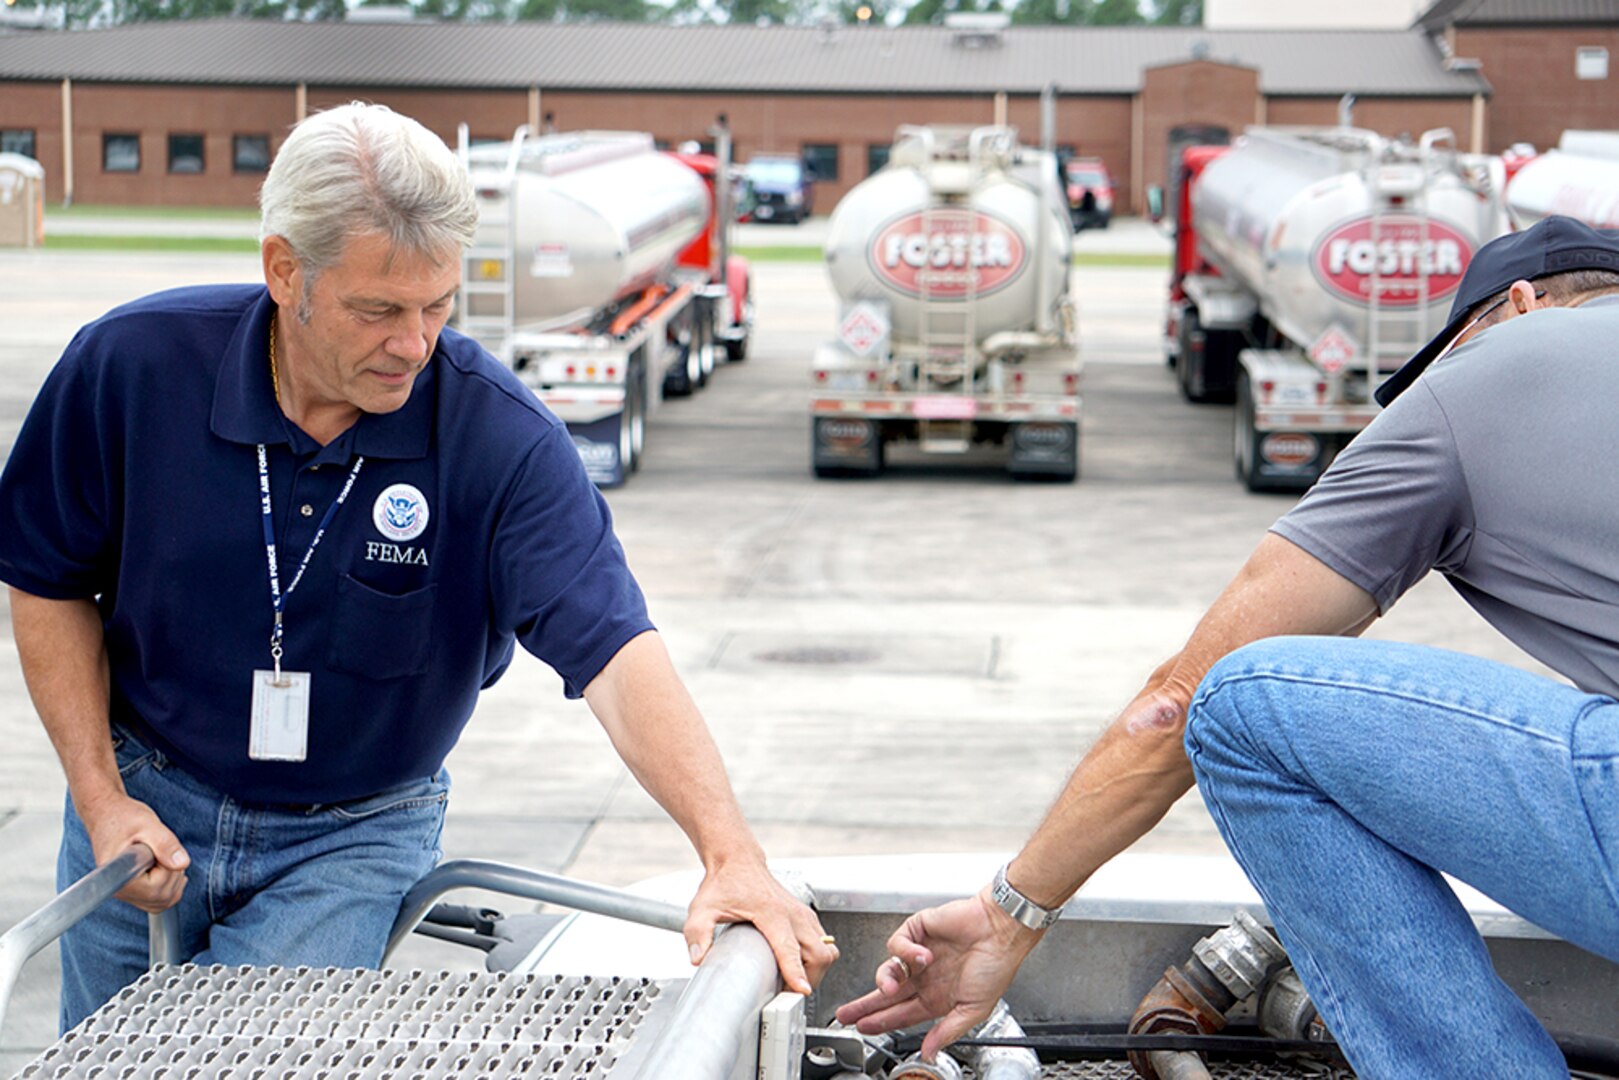 Robins Air Force Base was teeming with activity as Hurricane Irma approached Florida last week. At the FEMA Fuel Staging Area on base, Christopher Dresel FEMA representative, left, and Bryan Hill, Task Force Americas quality assistance representative, conducts an inspection of the FEMA transponder to ensure the device is placed in the proper location. (U.S. Air Force photo/ED ASPERA)